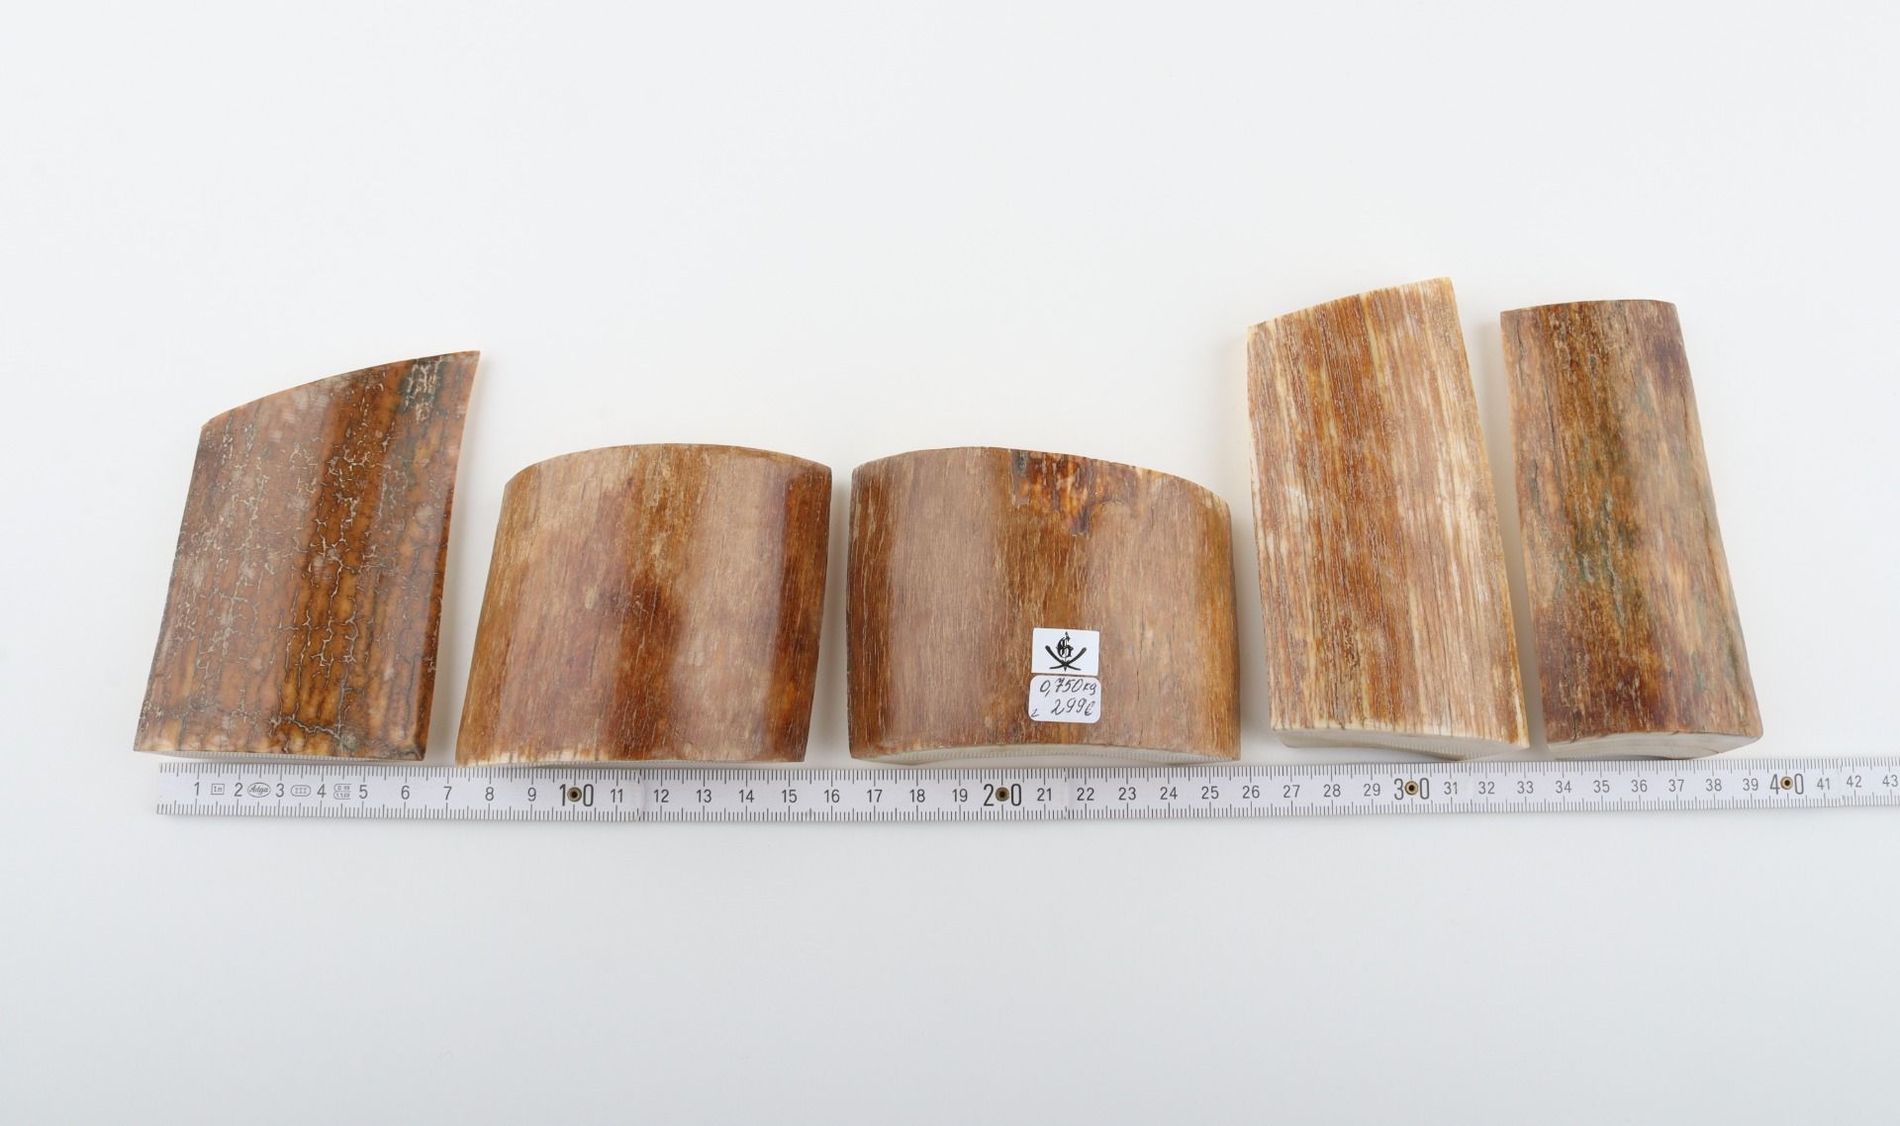 Thick mammoth bark pieces